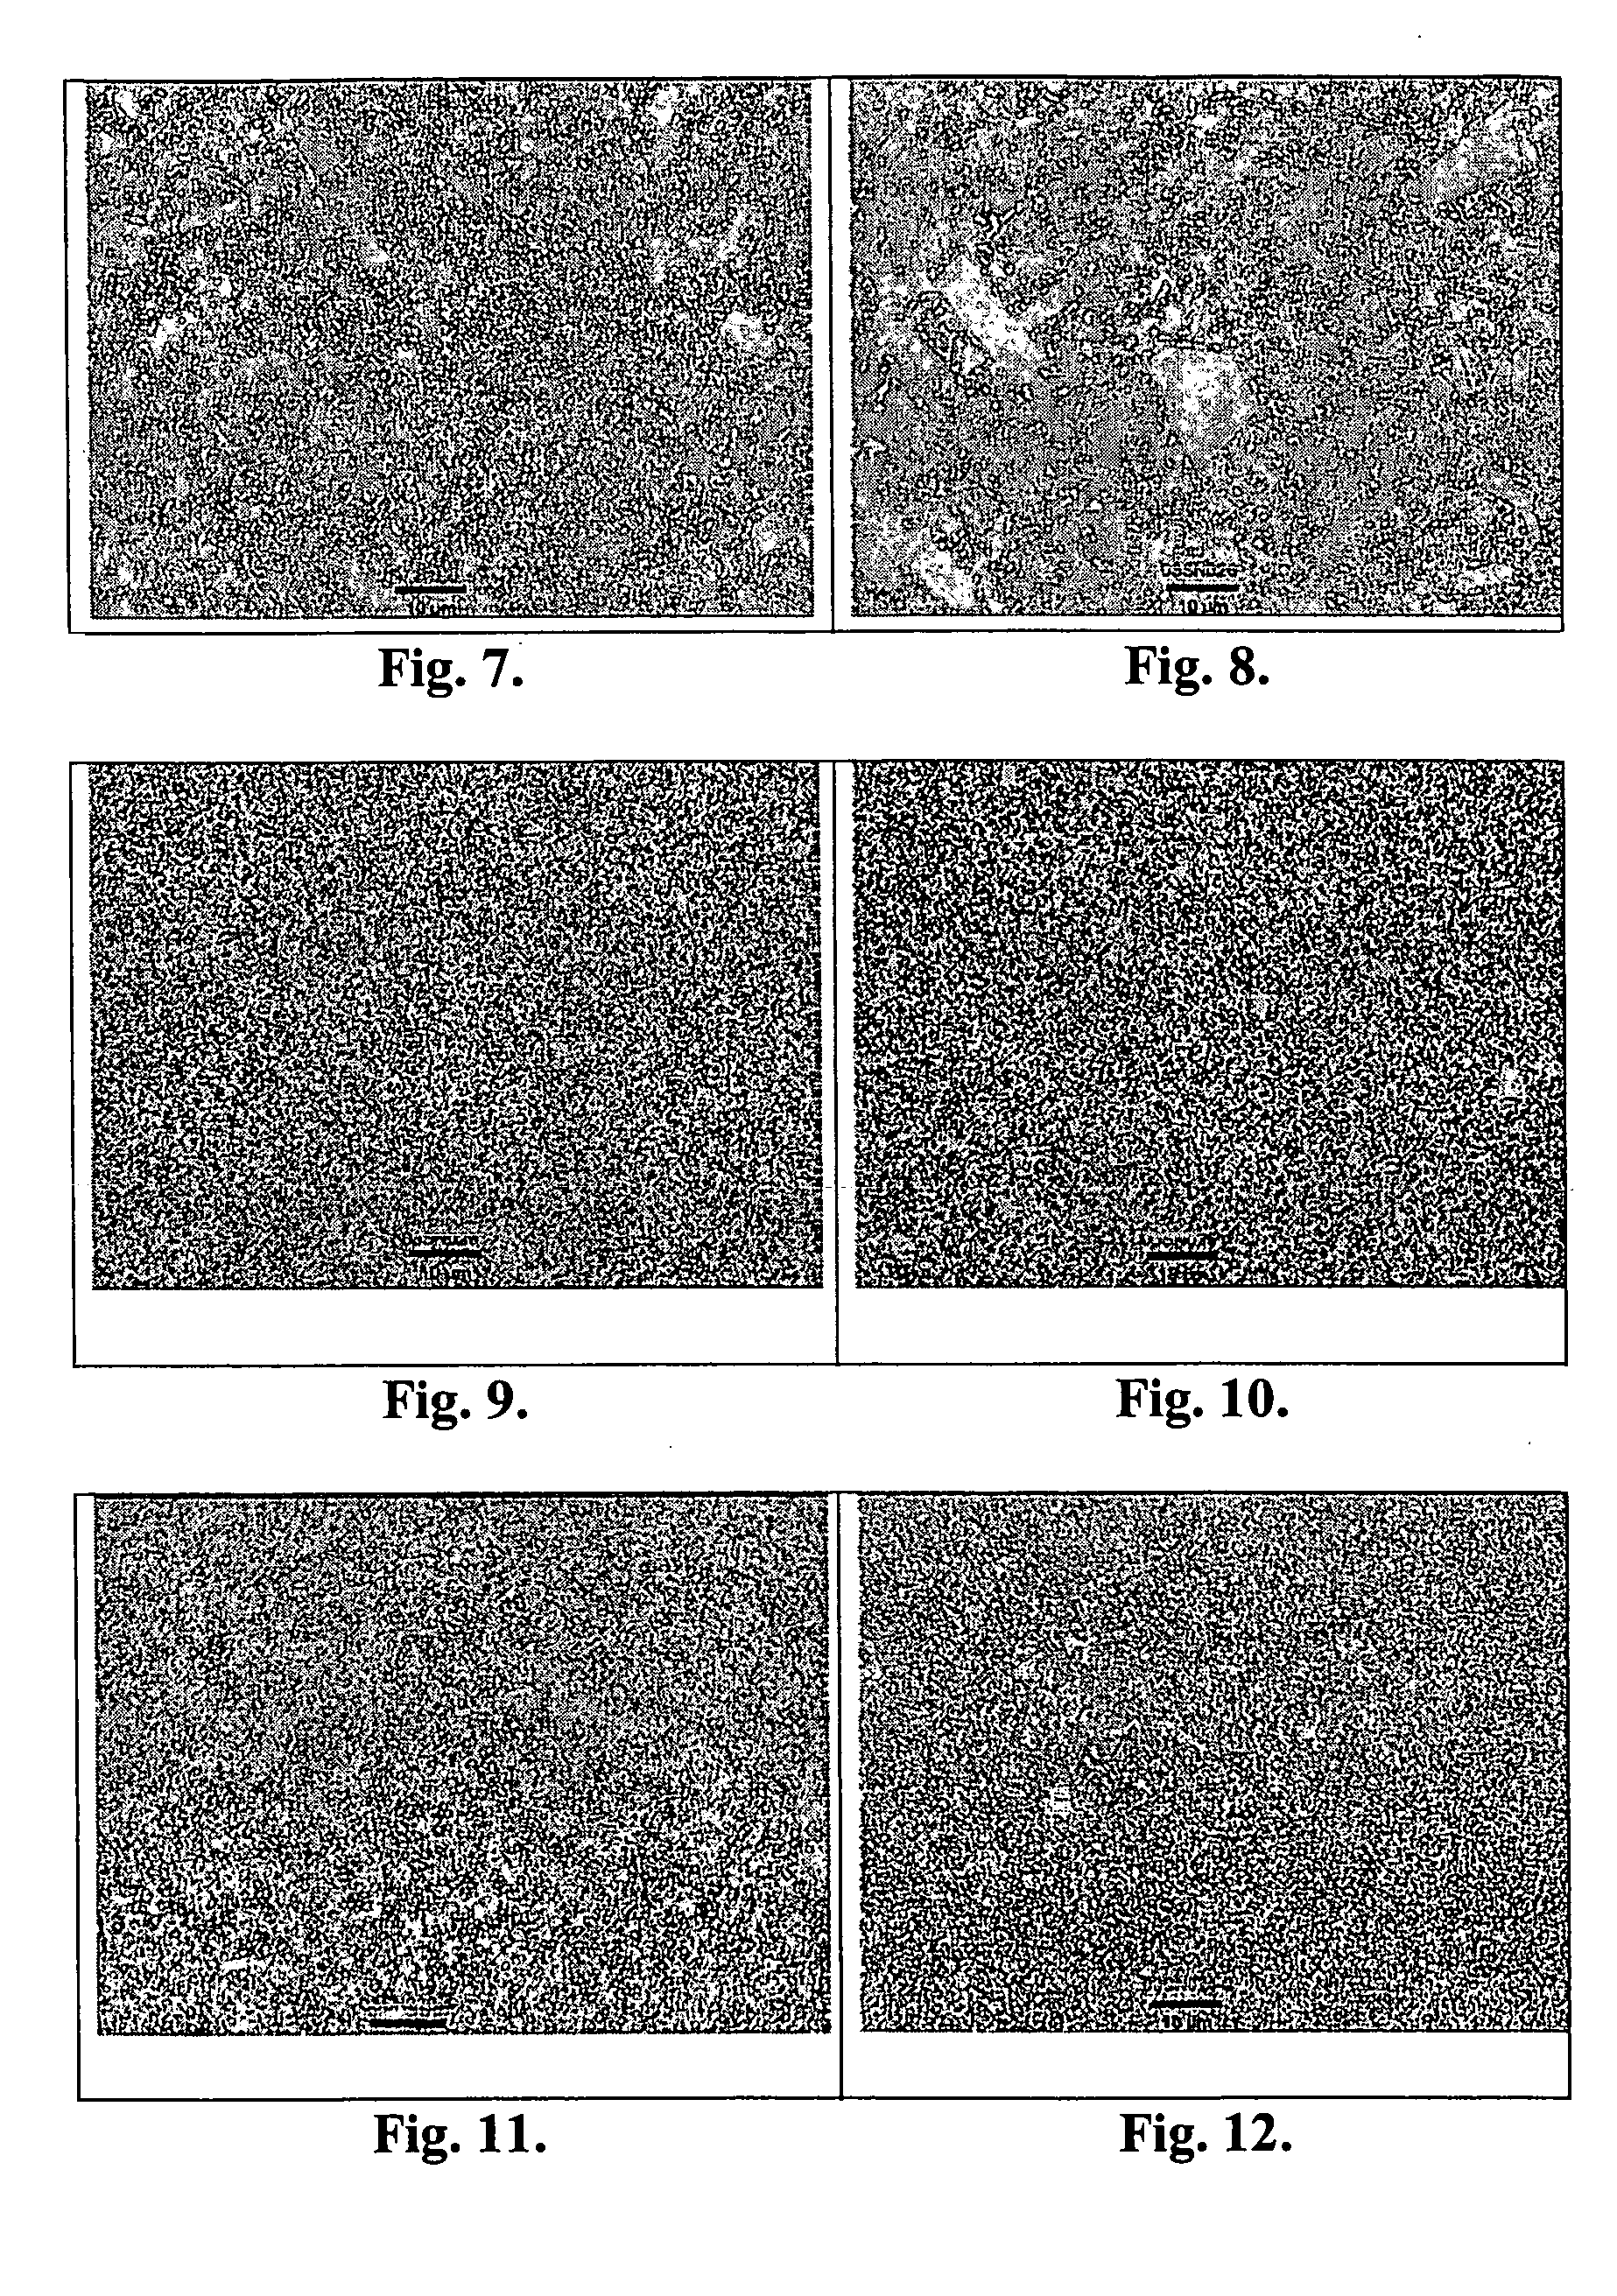 Method of making a fine grained cemented carbide